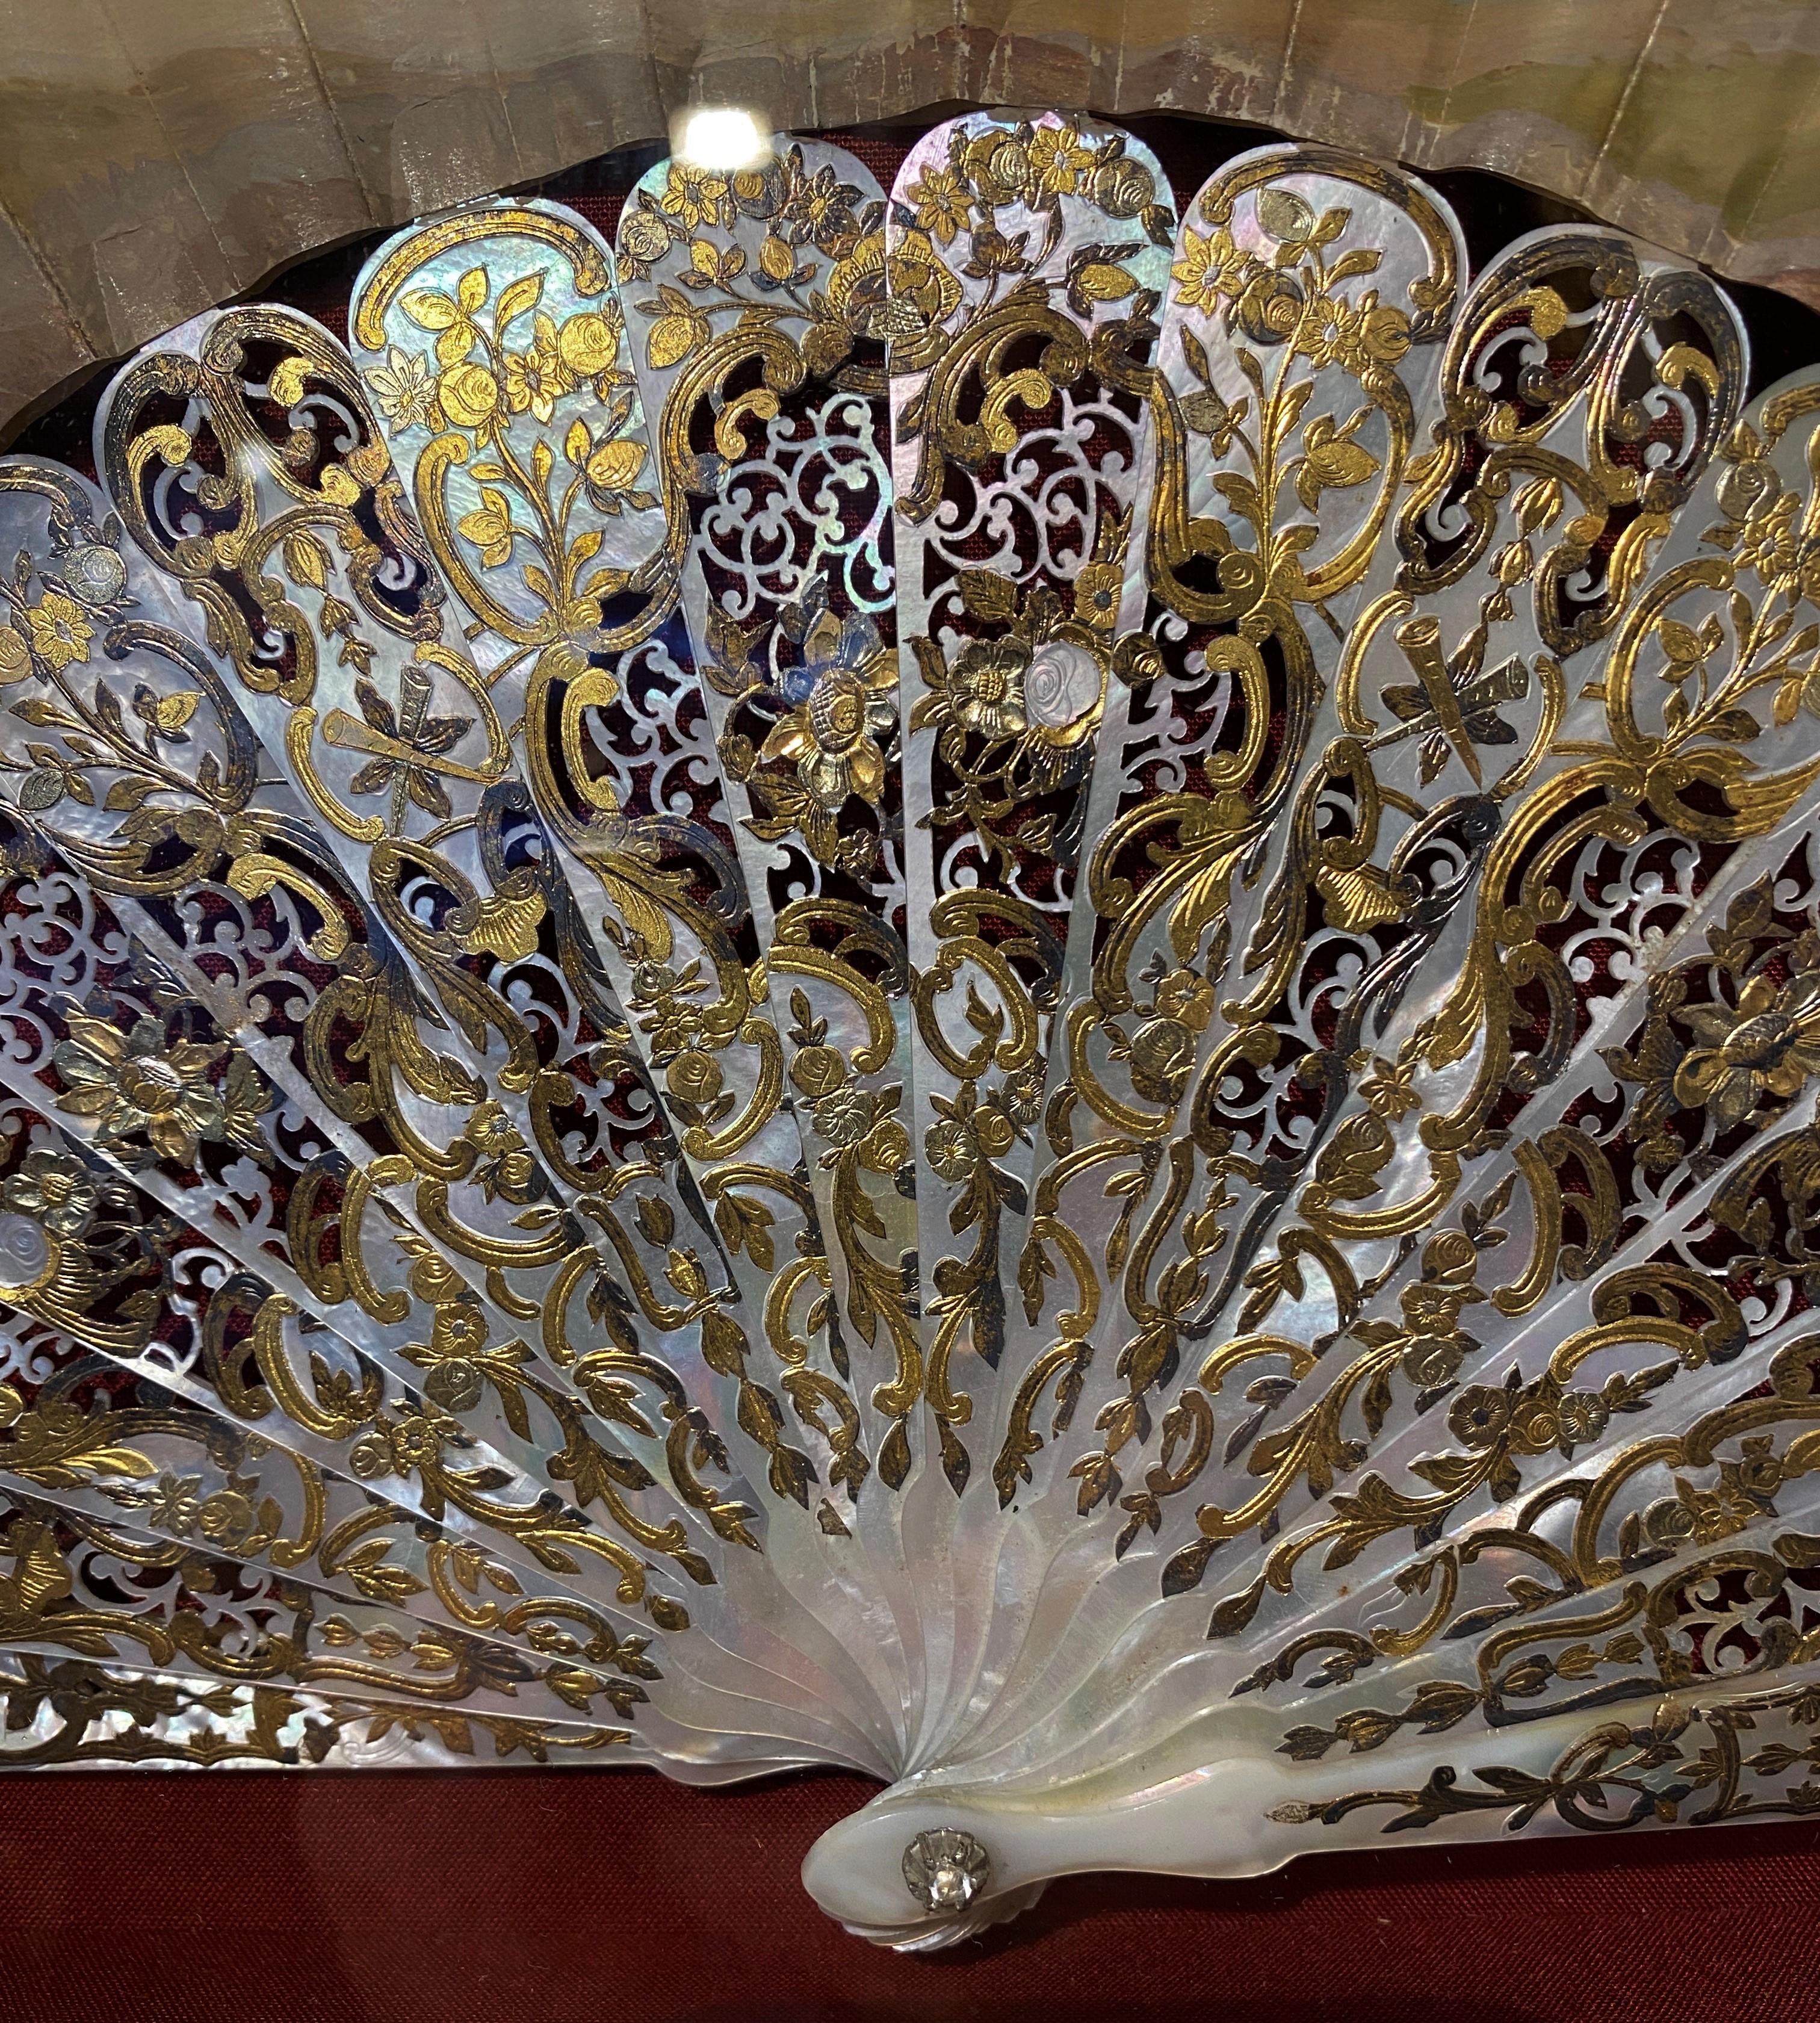 Magnificent fan from the Napoleon III period. Note its very beautiful frame in white mother-of-pearl finely pierced, and applied with gold and silver leaf decorated with flowers and trophies. The paper sheet is painted in gouache with gallant scenes